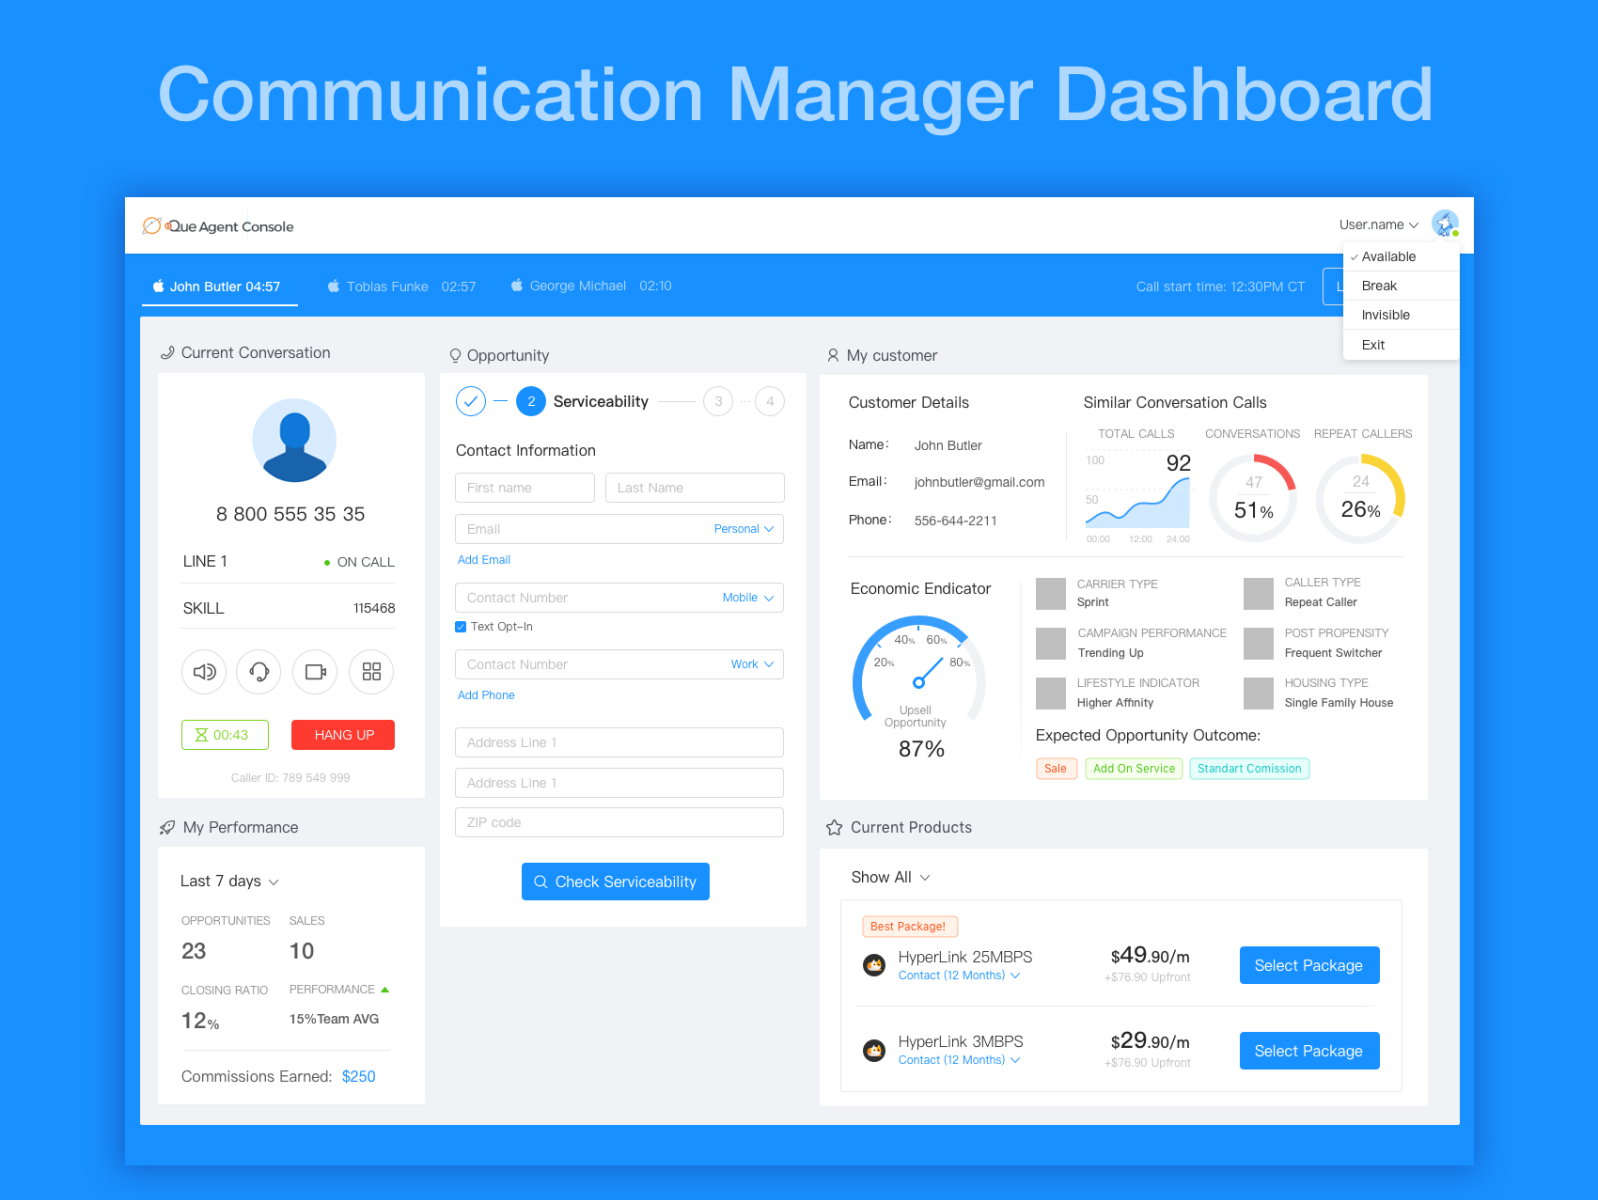 Communication Manager Dashboard Redesign by Stacy Sidenko on Dribbble